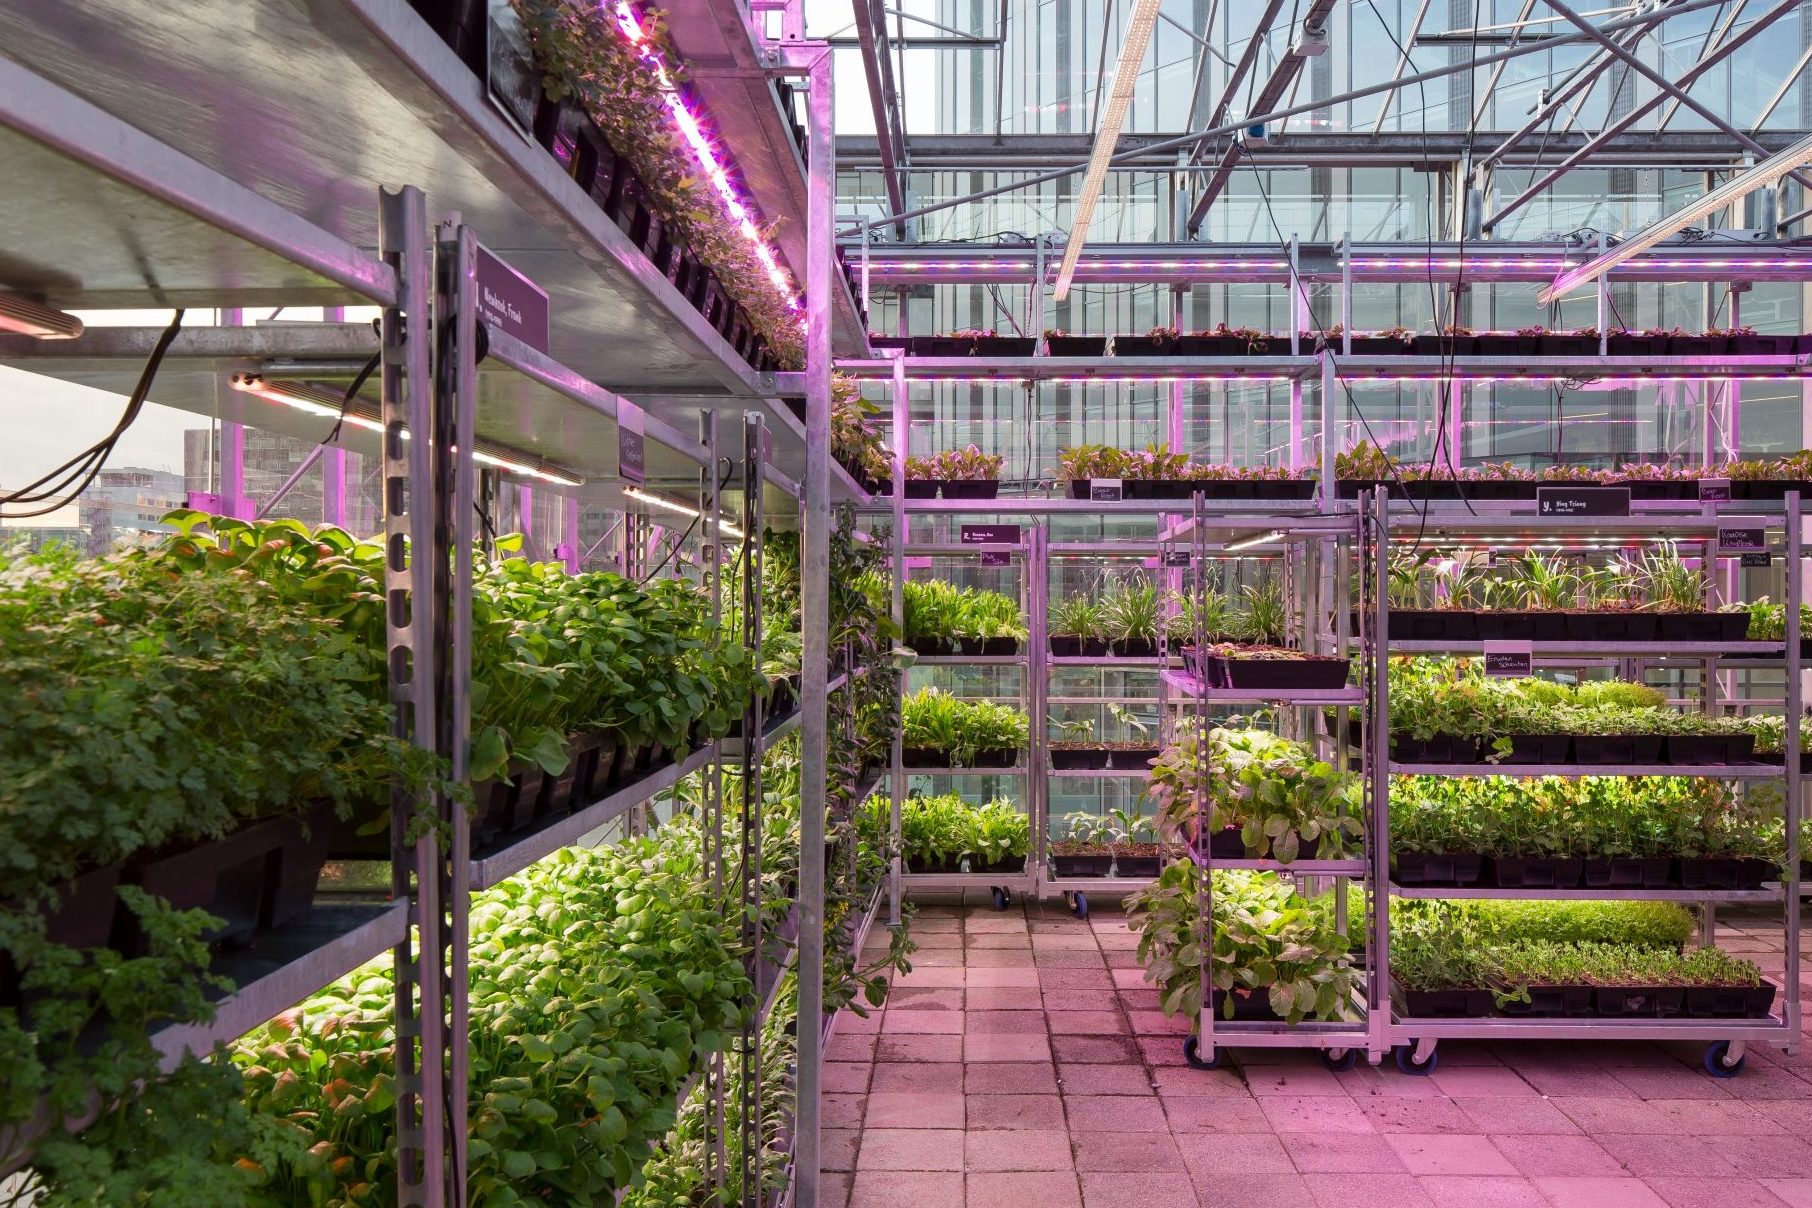 Trays of living herbs and vegetables at The Green House Restaurant in Utrecht. The produce is routinely replenished by Amsterdam-based startup ‘Hrbs’. (Photo by Cepezed Architects)